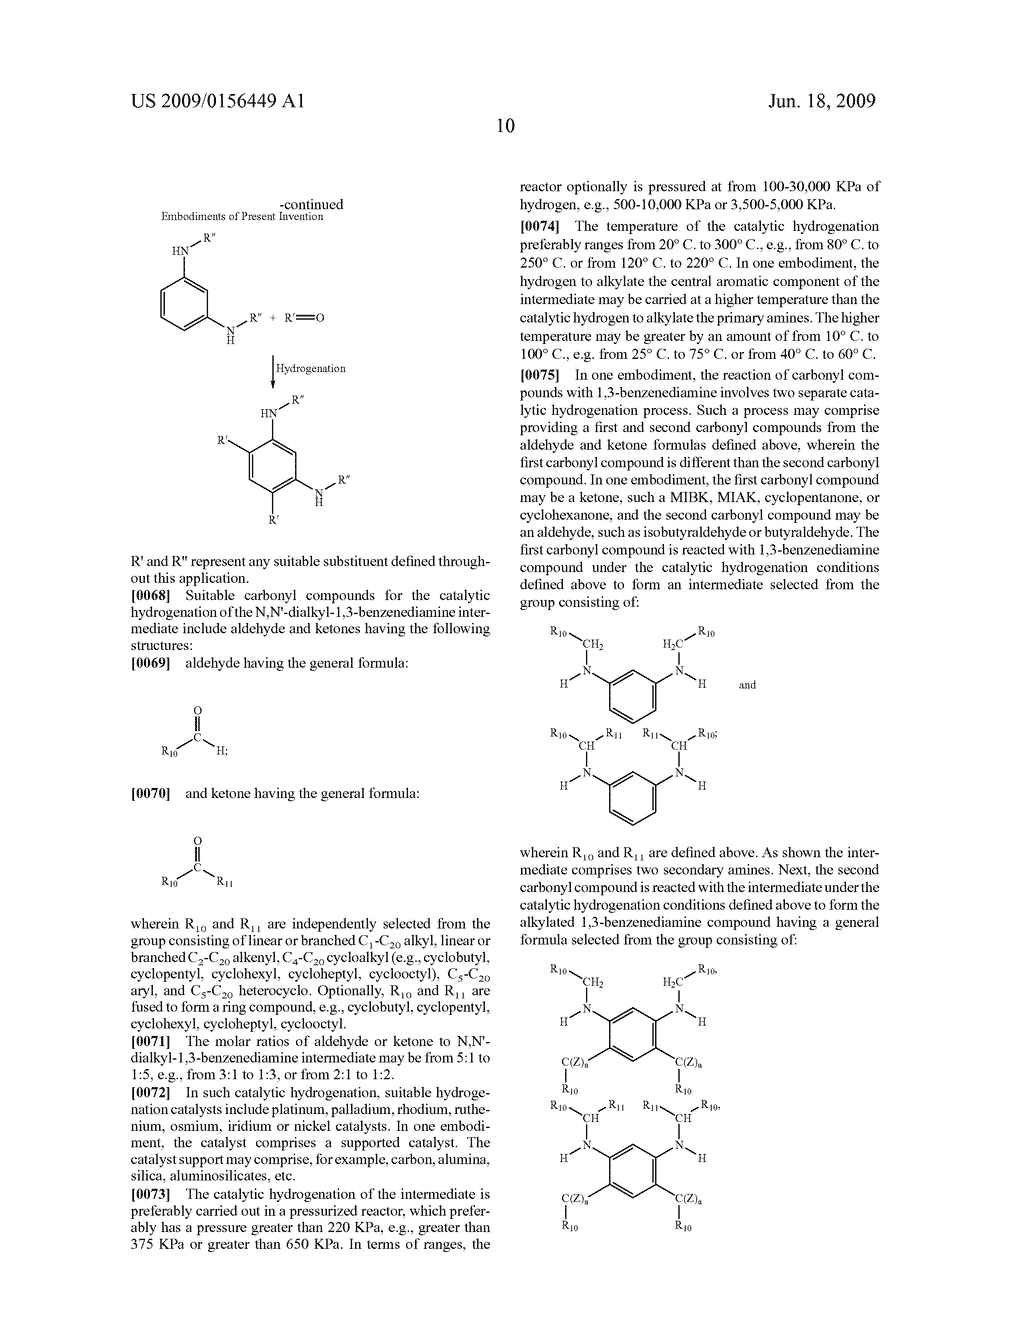 ALKYLATED 1,3-BENZENEDIAMINE COMPOUNDS AND METHODS FOR PRODUCING SAME - diagram, schematic, and image 11